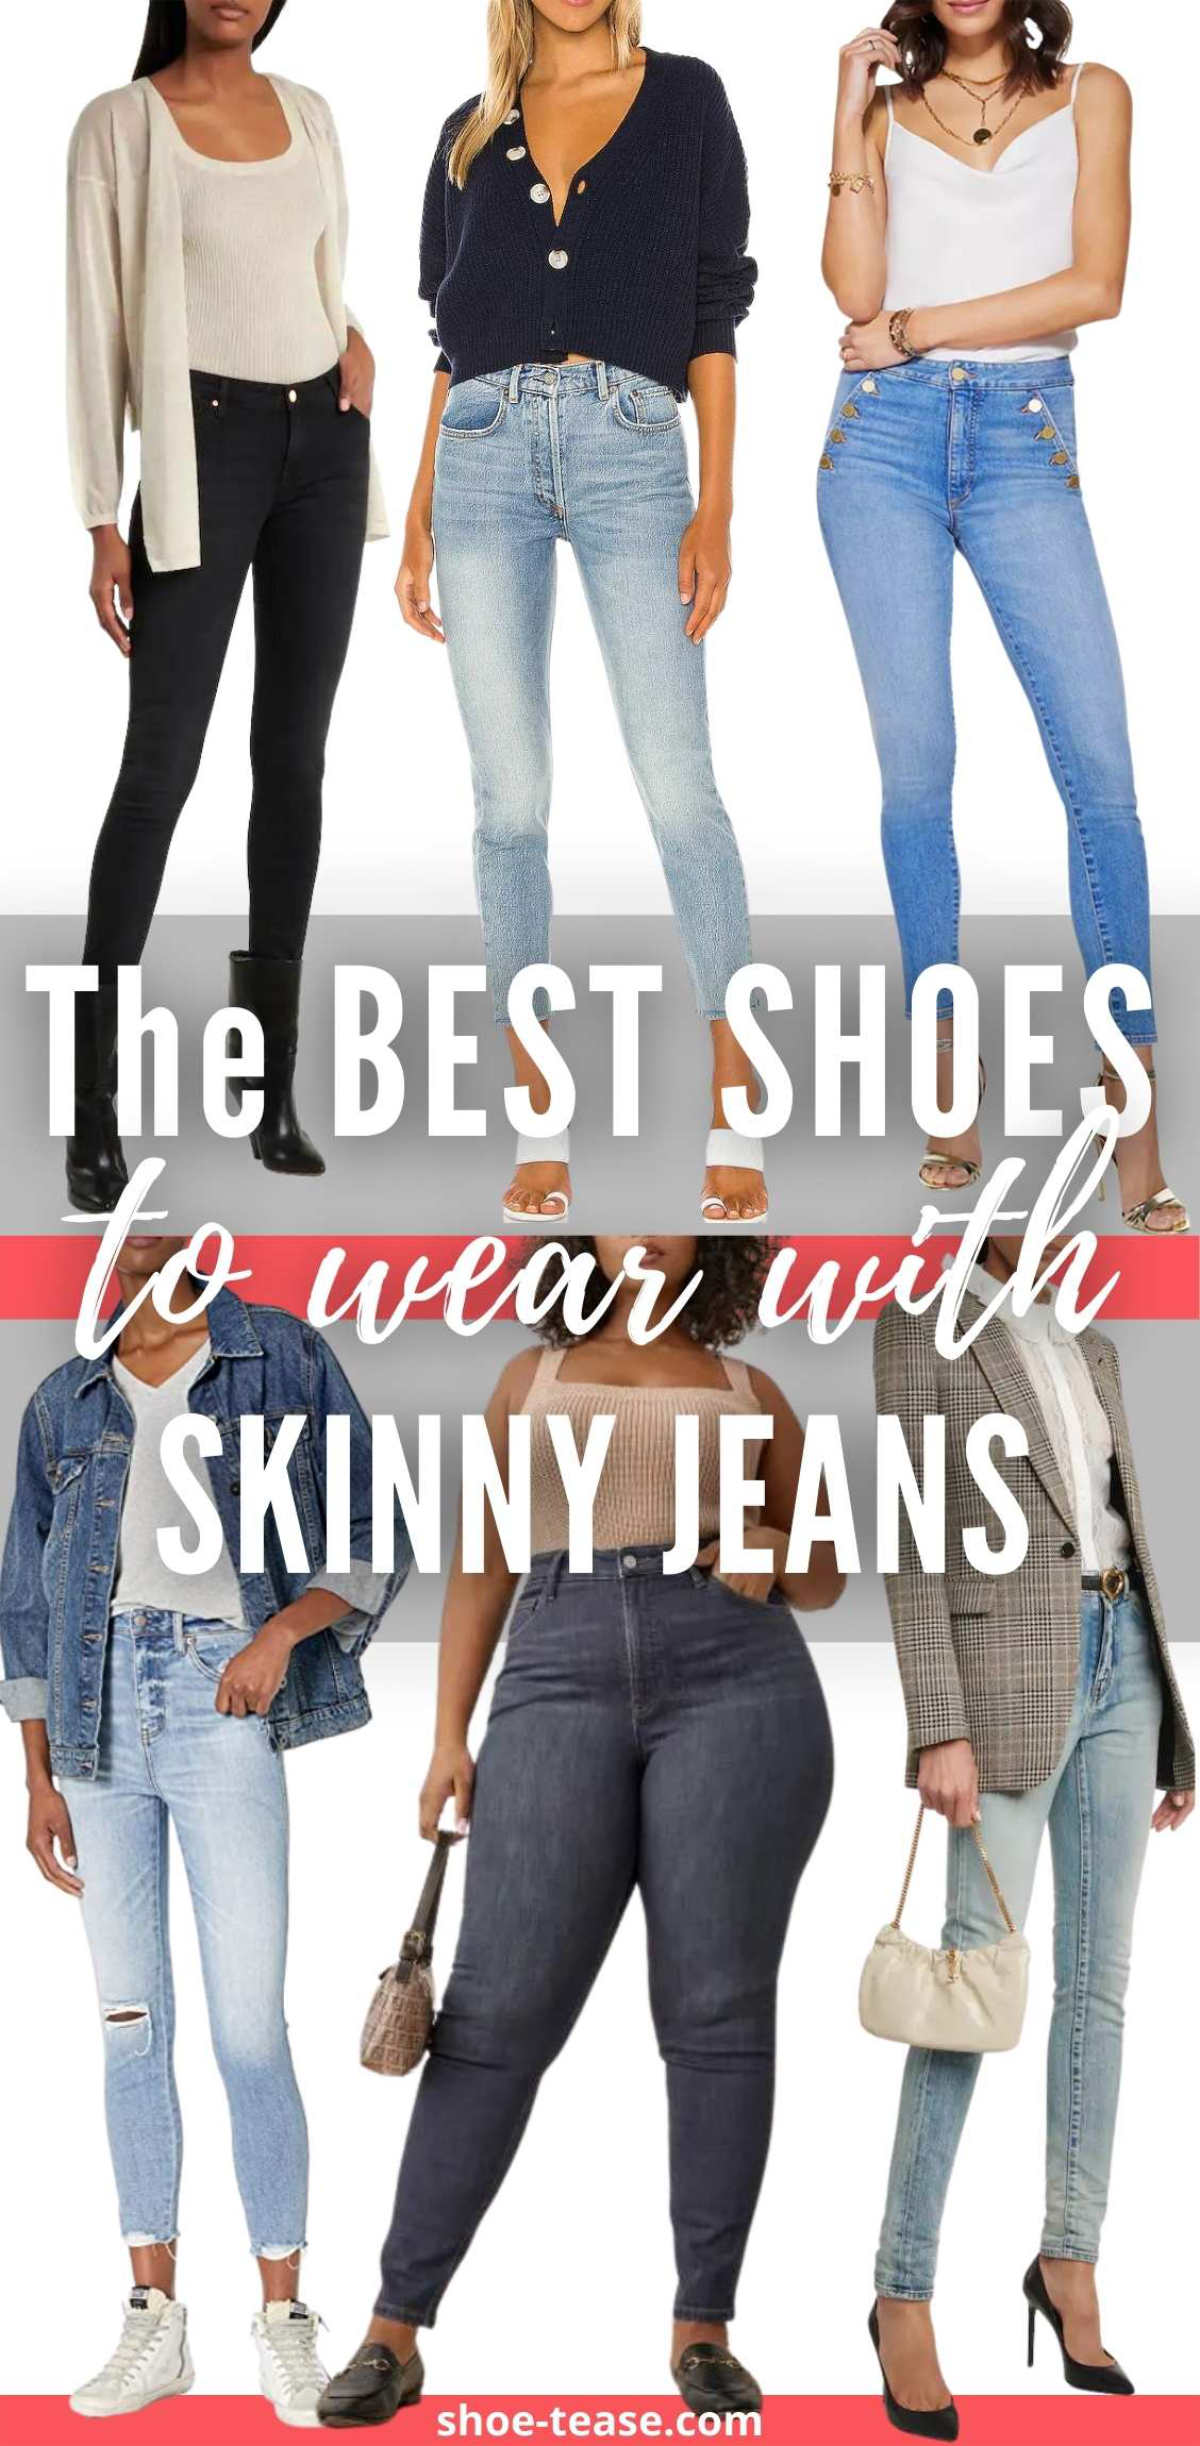 Readers Vote for the Best Skinny Jeans for Travel